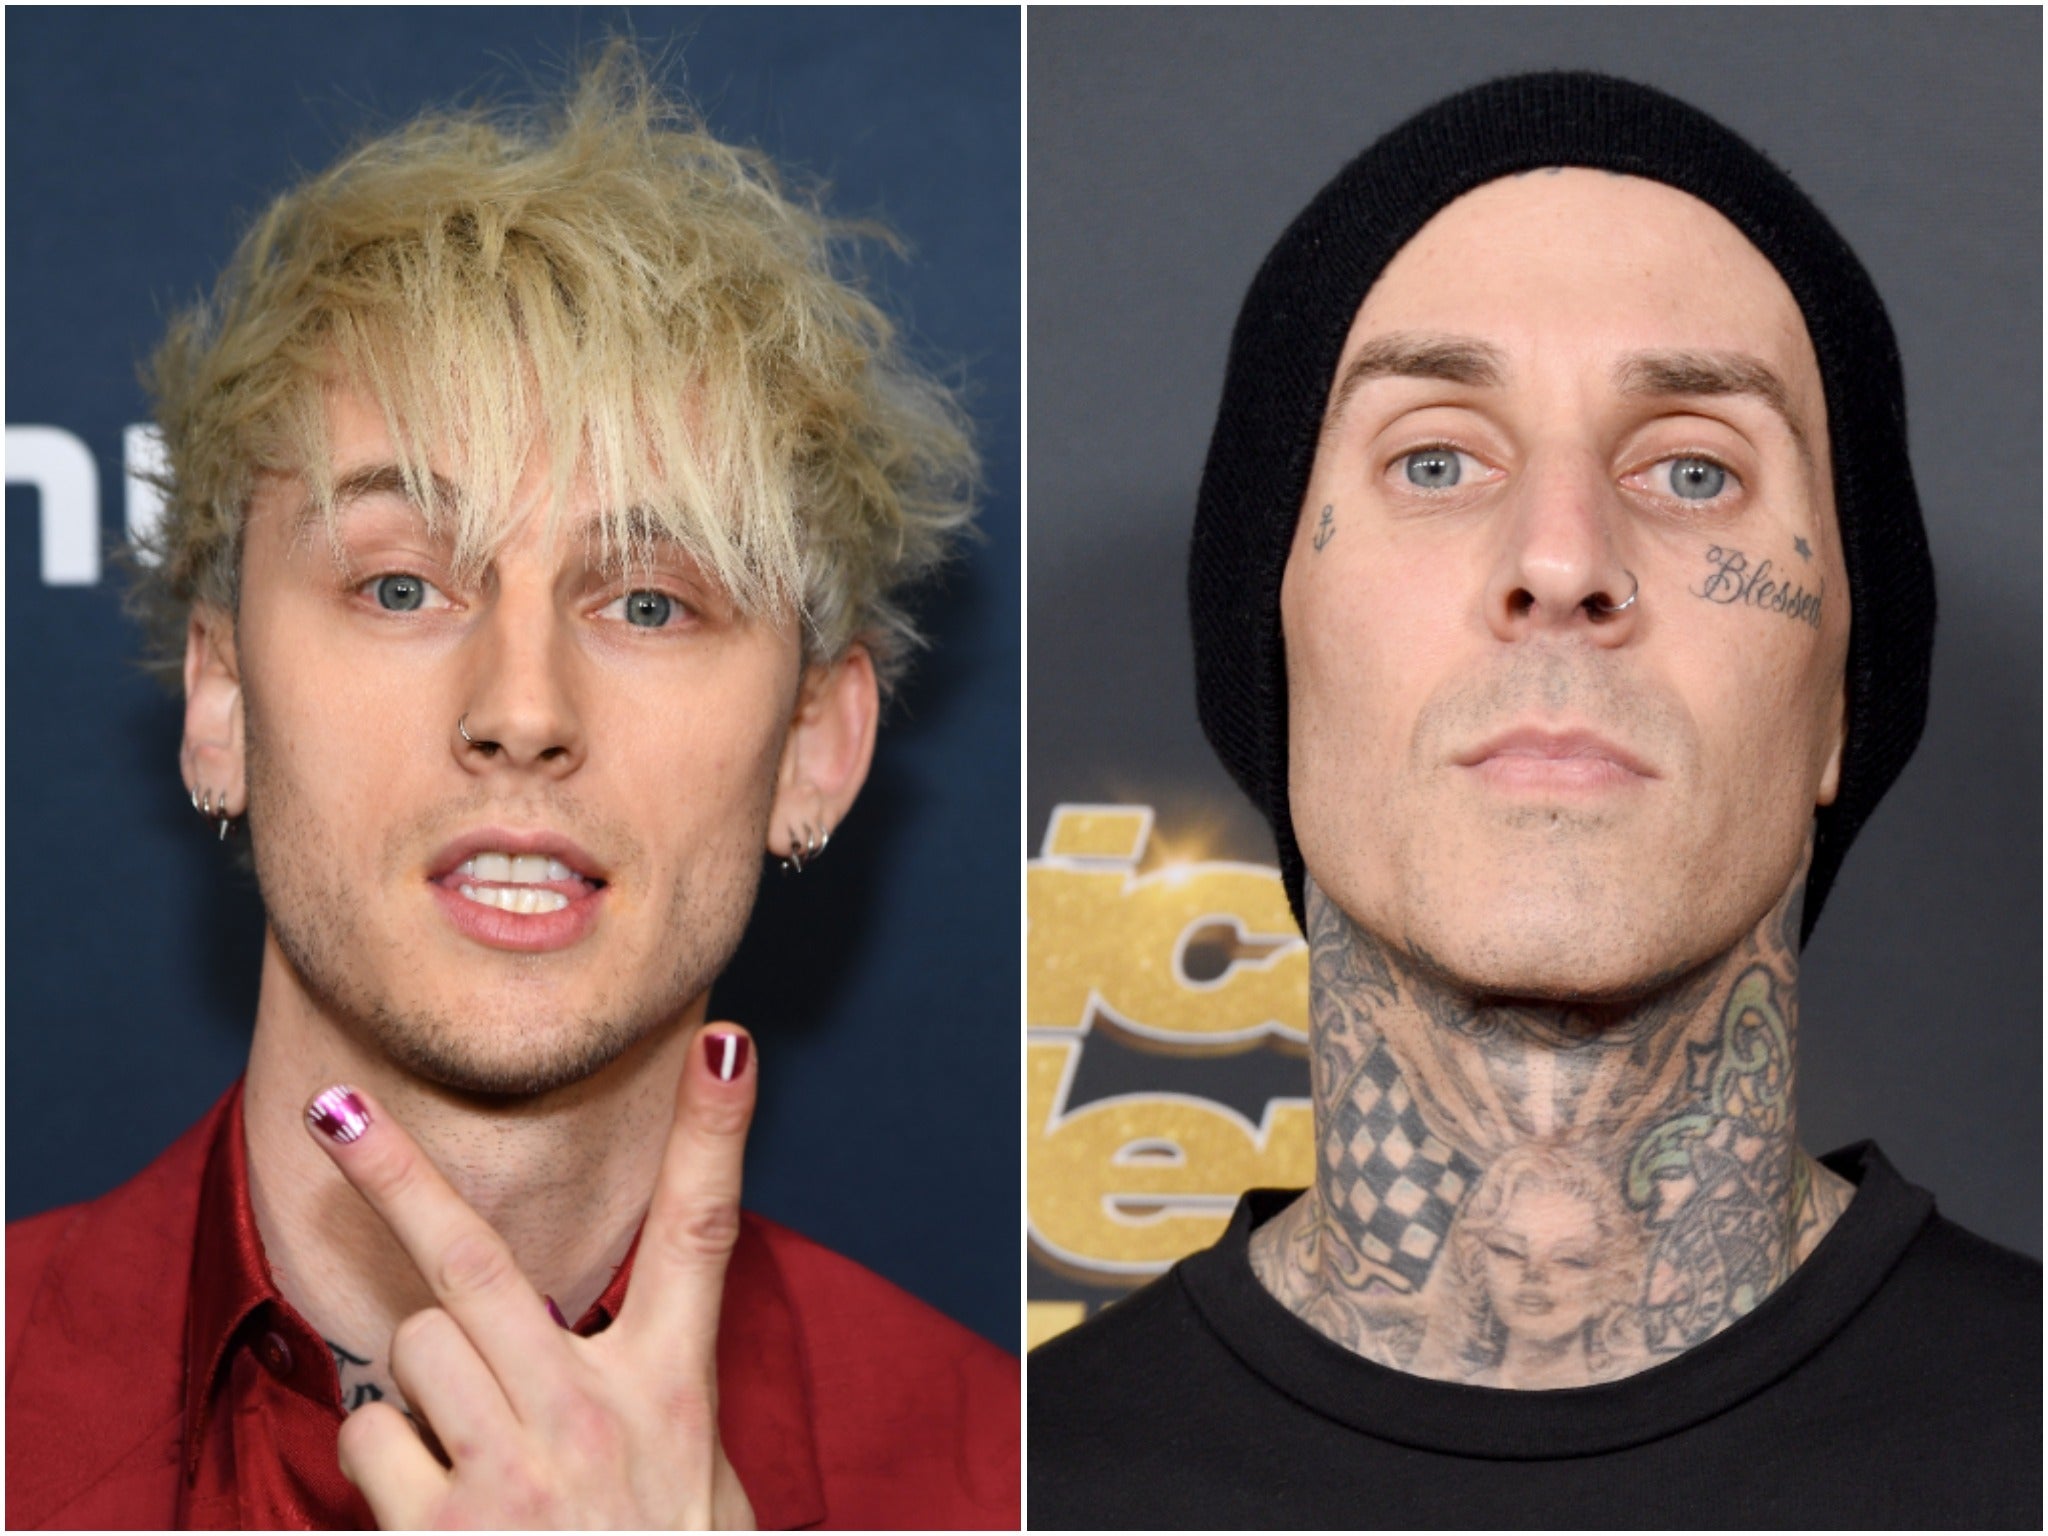 Discover more than 161 mgk tattoos latest